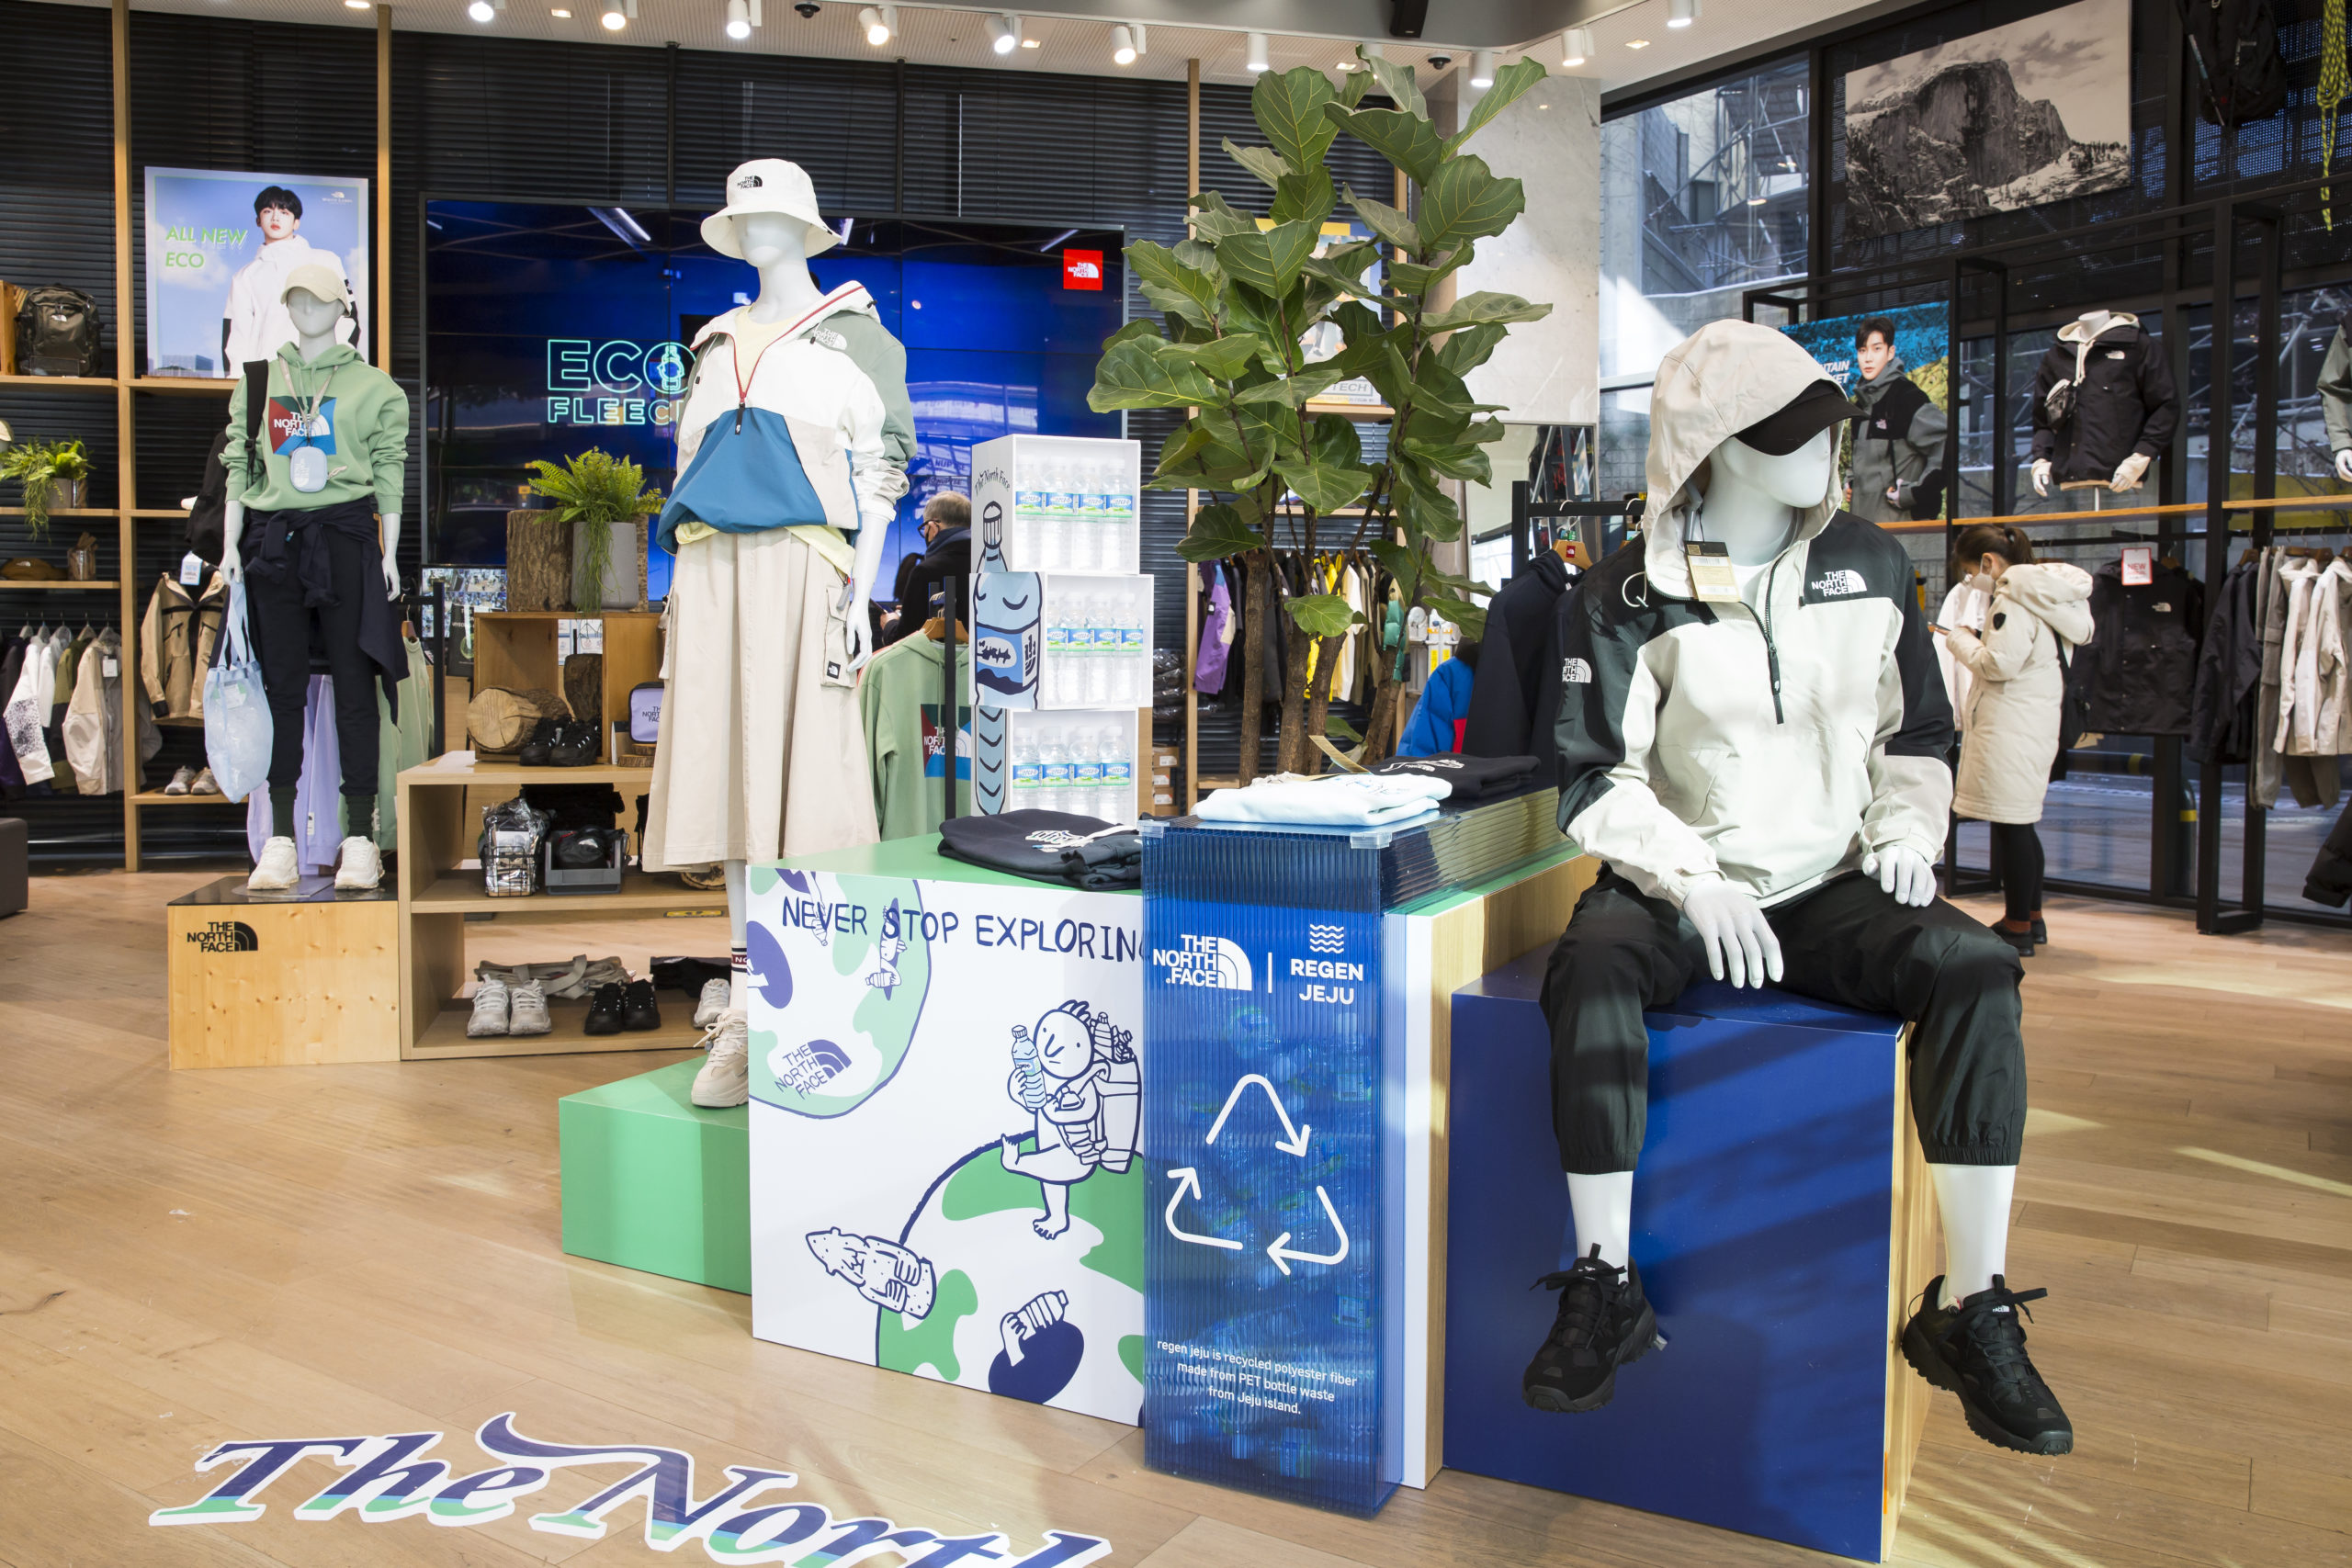 waarom niet salon Goed gevoel The North Face Korea's Never Stop Exploring Campaign Draws Attention to its  New Eco-Friendly regen jeju Collection – Hyosung Performance Textiles